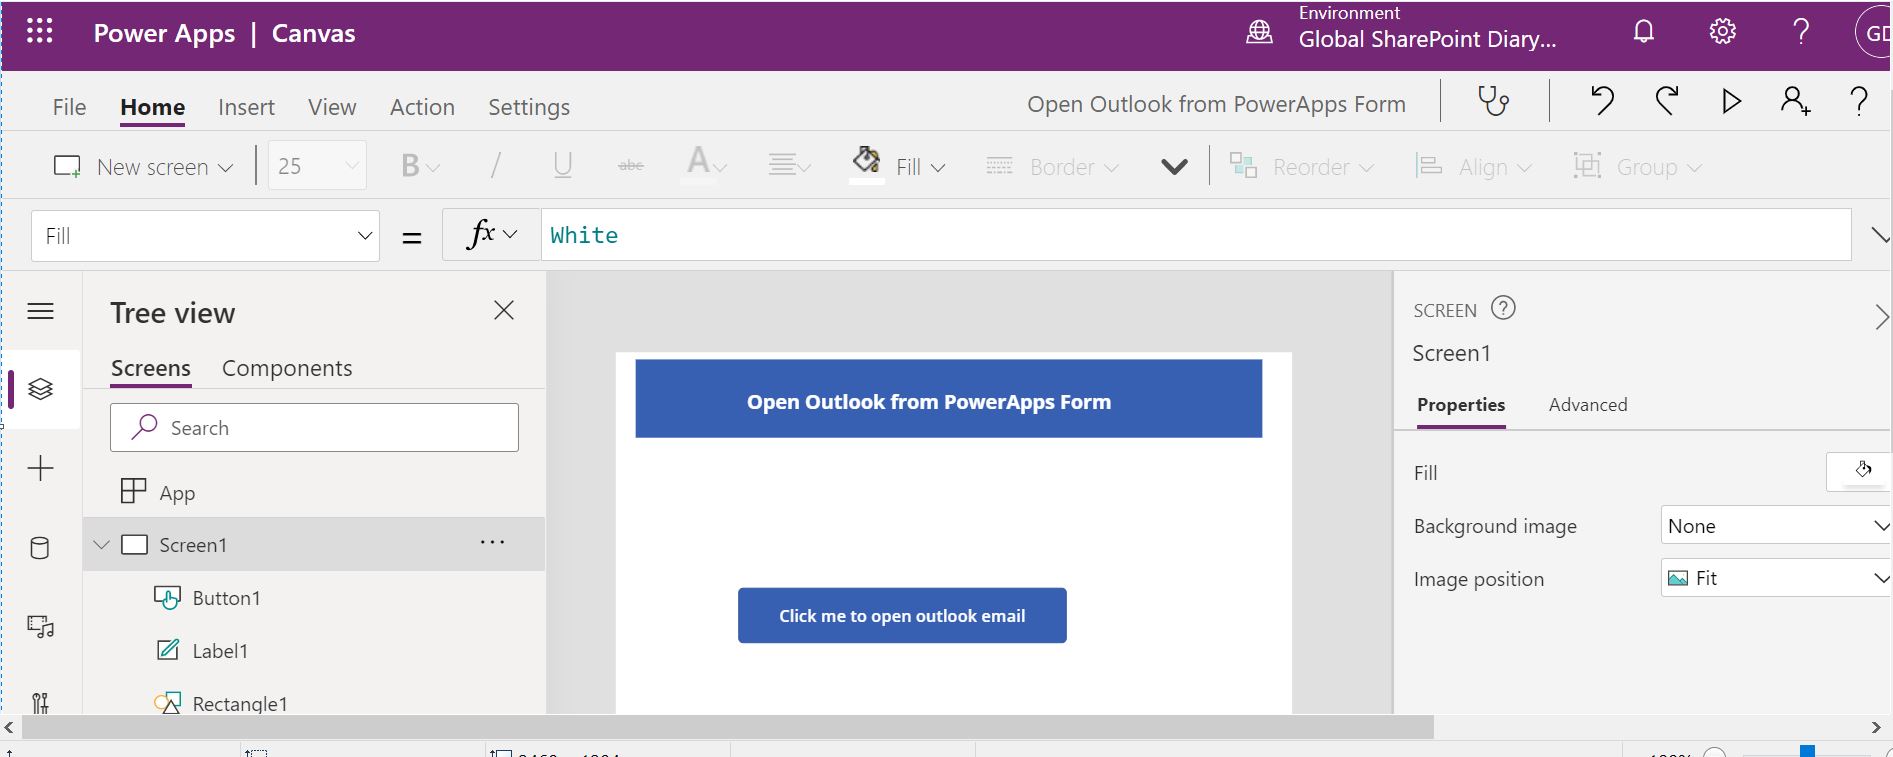 Contact us form in PowerApps